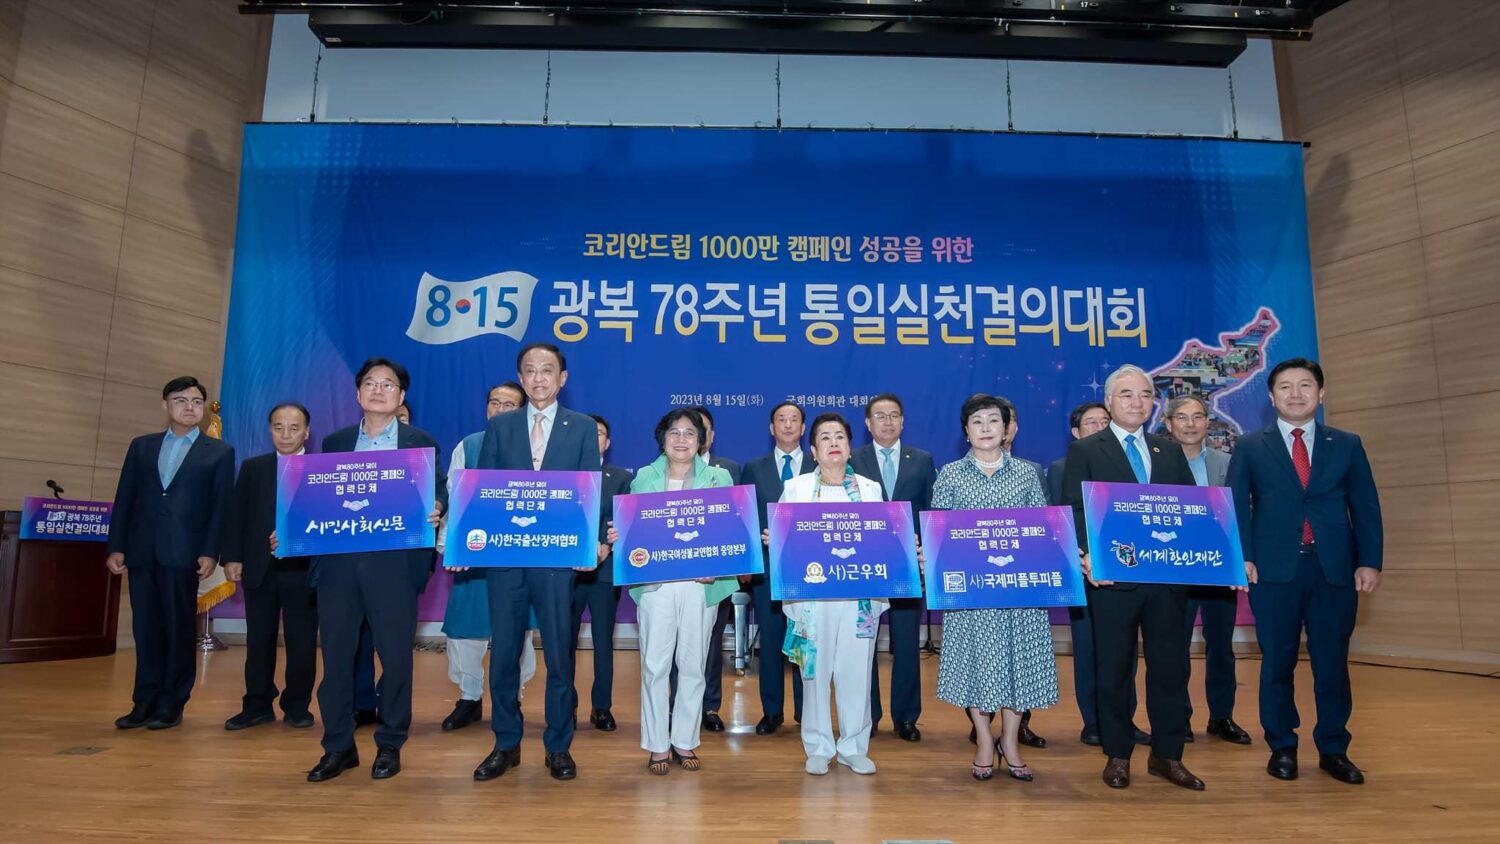 In the Media: Korean unification movement launched at Korean National ...